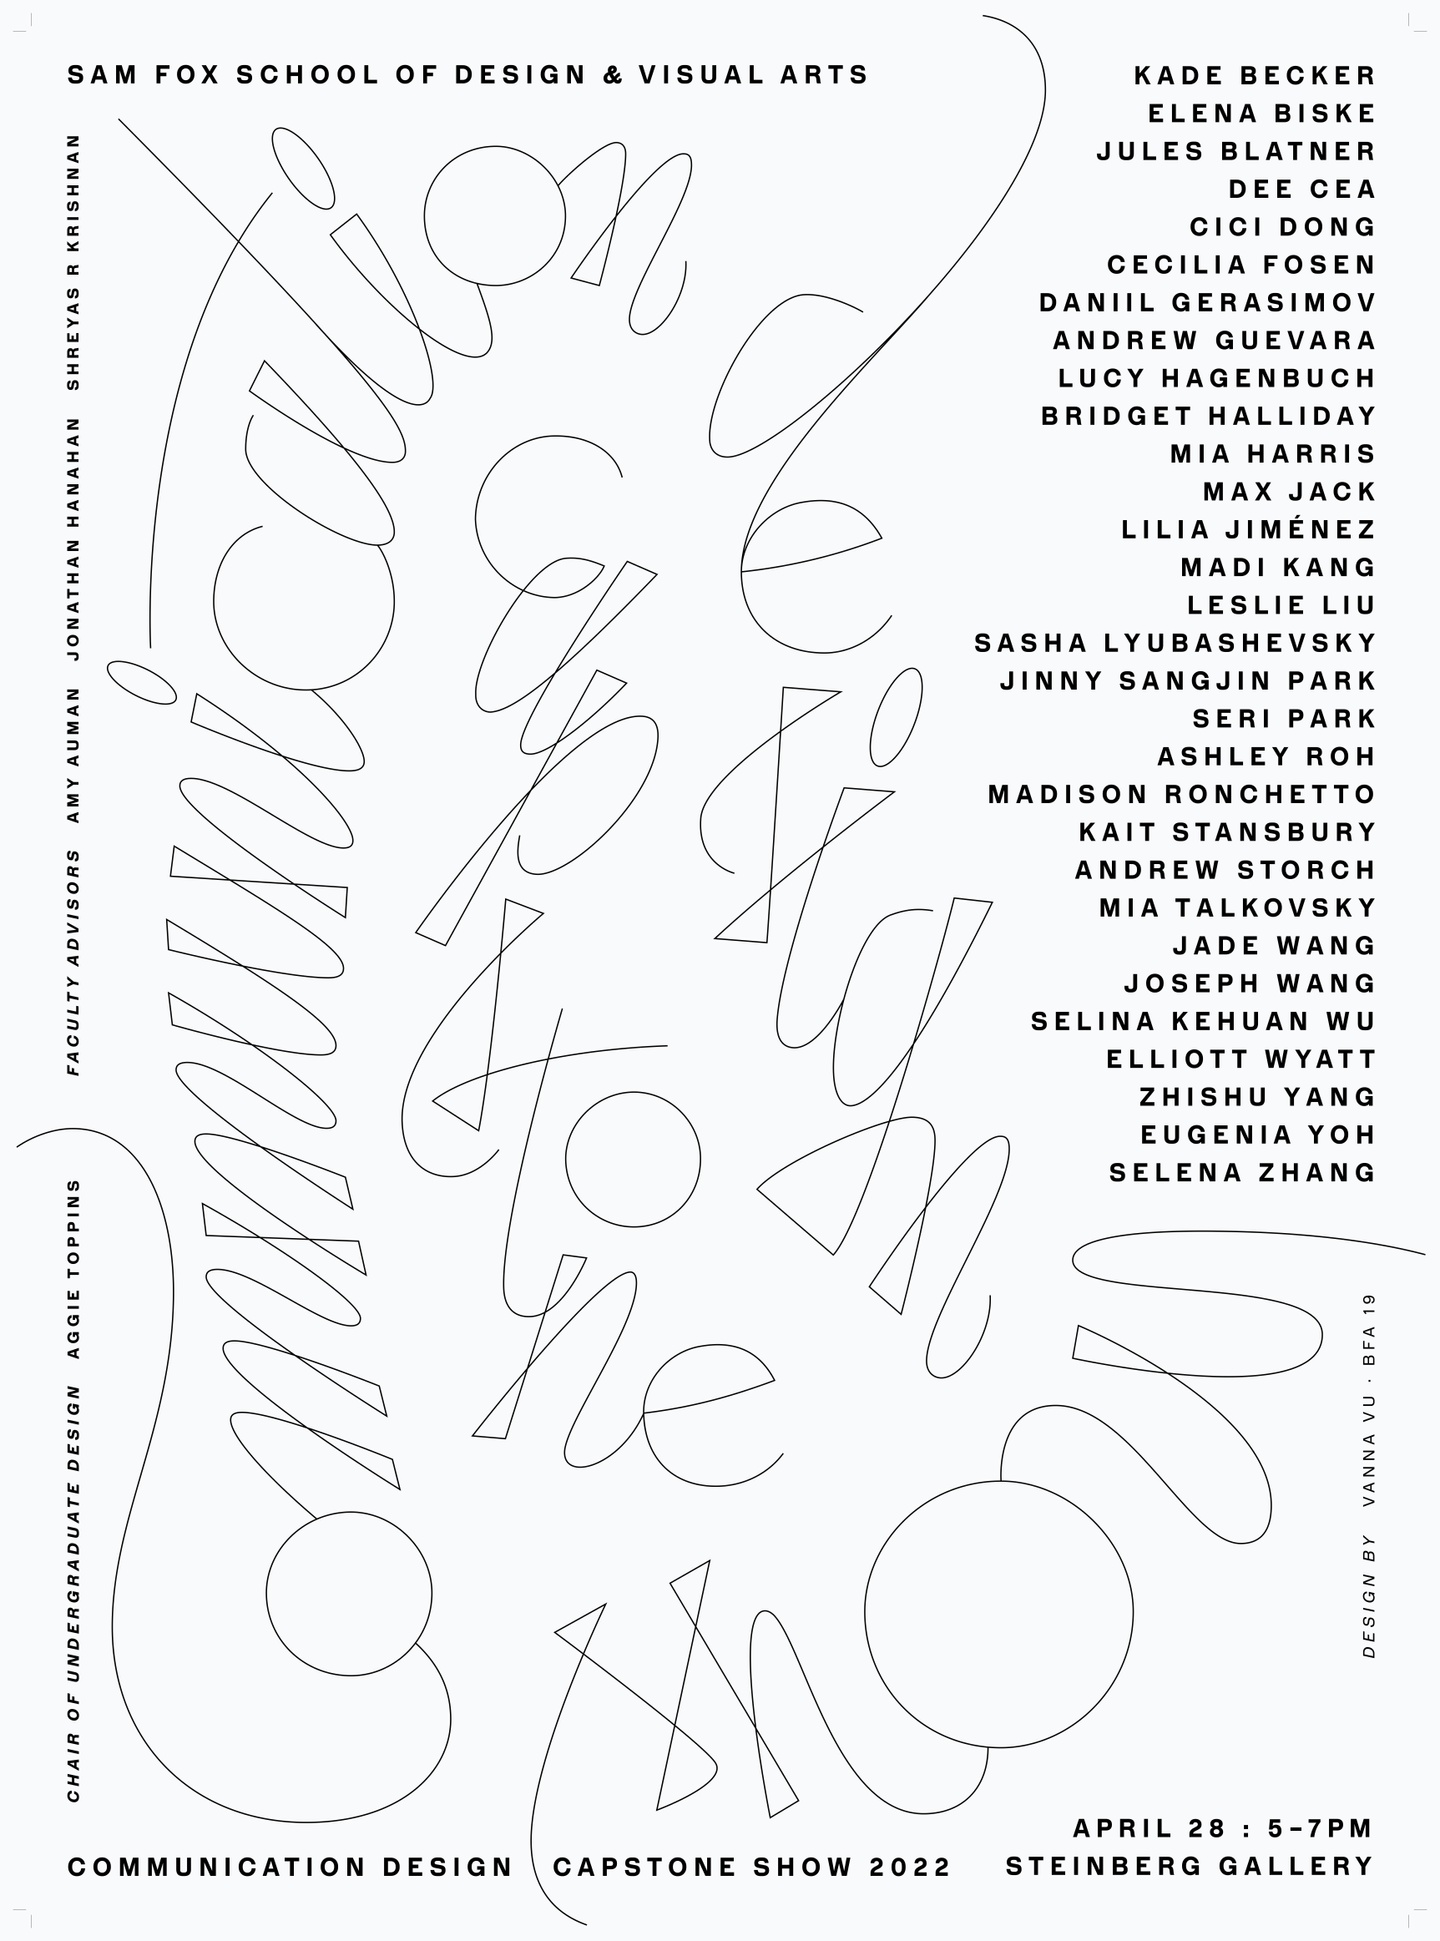 Black-and-white poster image for the Communication Design Capstone Exhibition, with the title written in scripty cursive font.